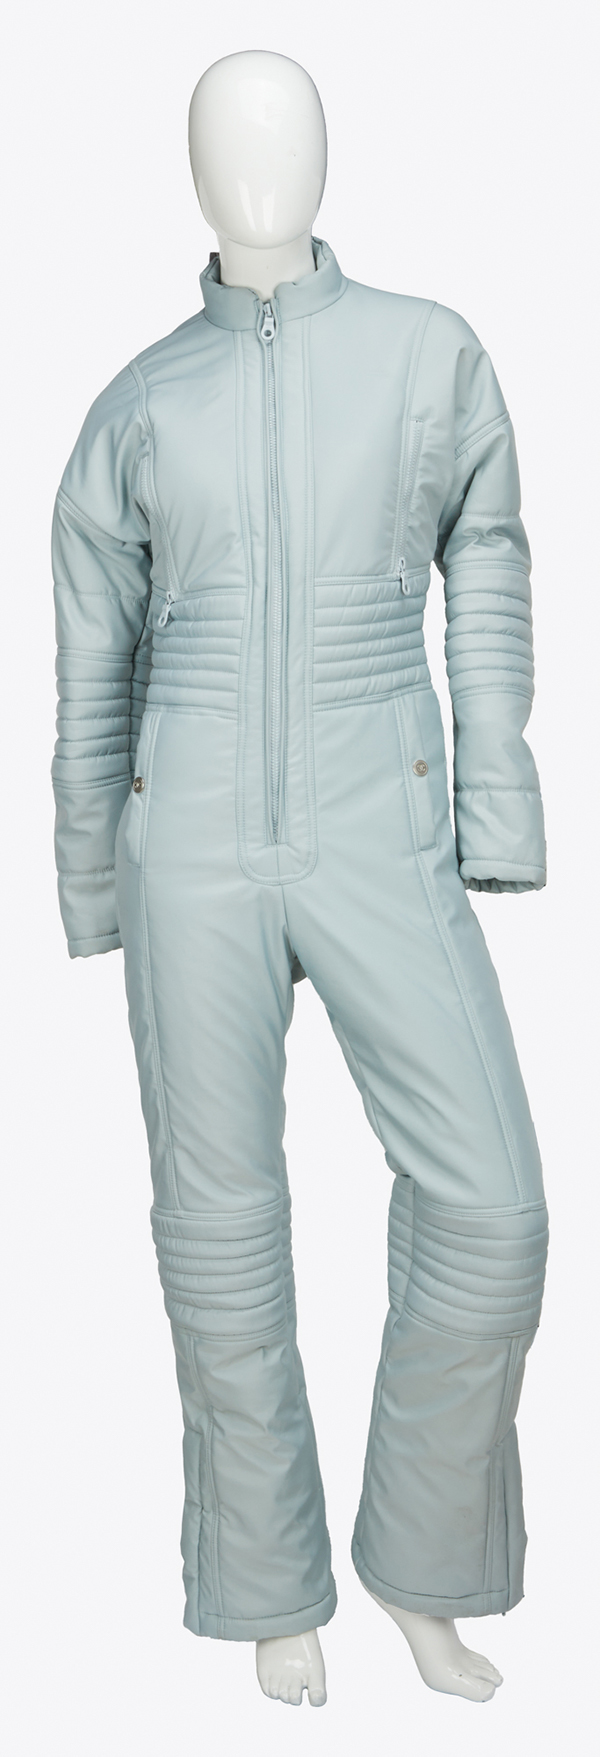 A Chanel 2001 nylon ski suit in pale green with silver hardware